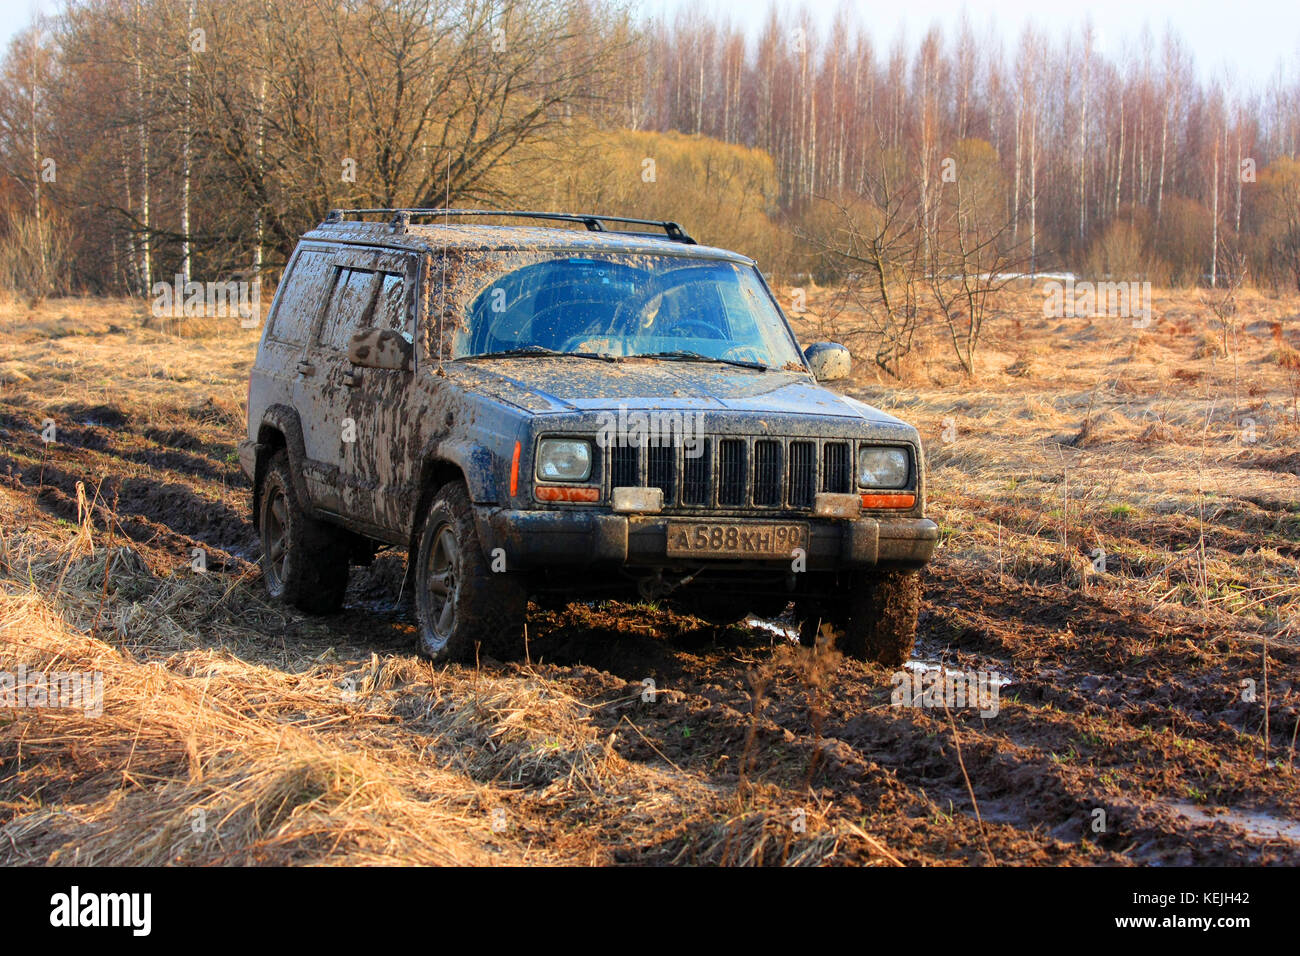 DIRTY OFF-ROAD 4x4 WARSAW - Äventyrare 